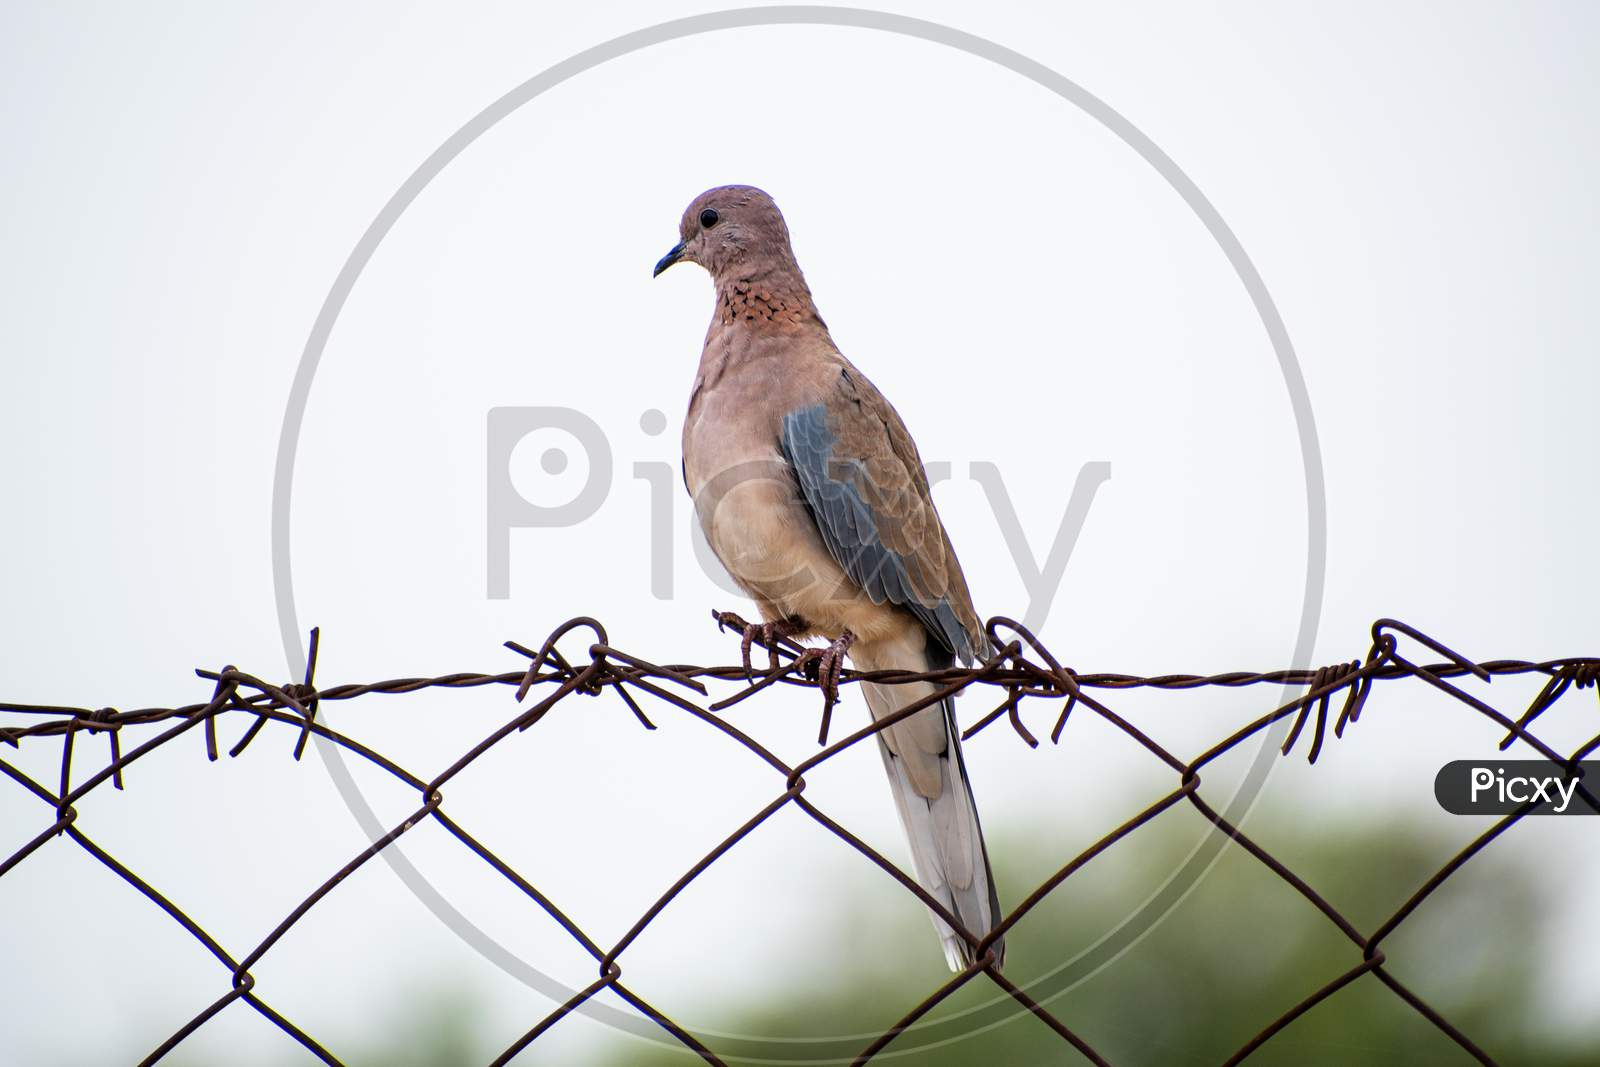 The Laughing Dove